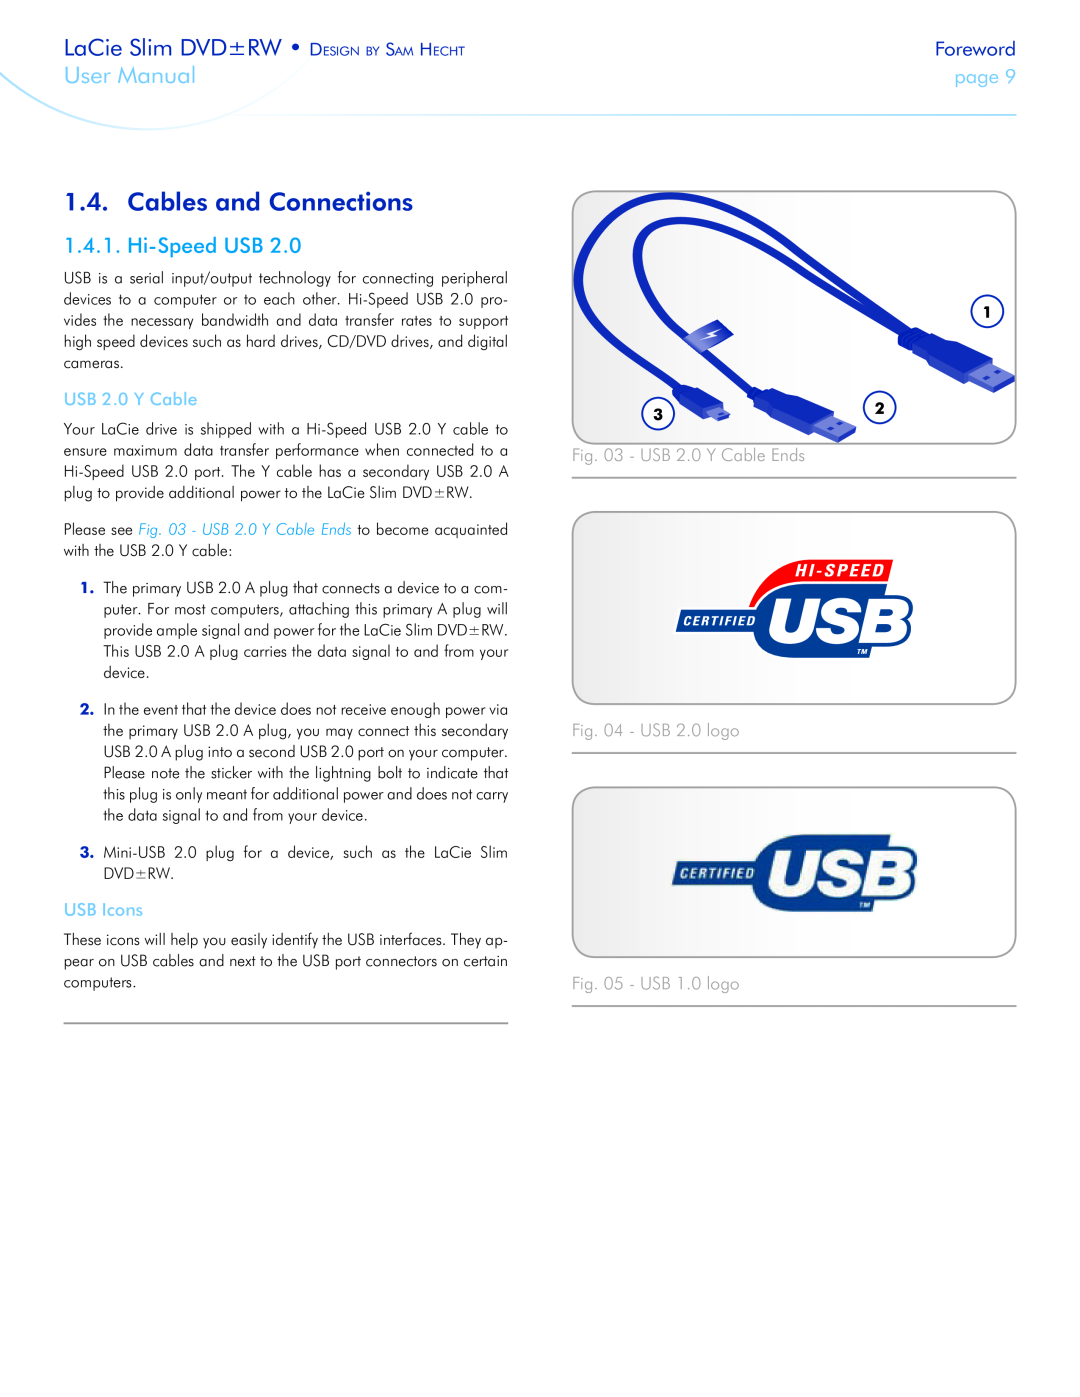 LaCie 301910 Cables and Connections, Hi-Speed USB, USB Icons, USB 2.0 Y Cable Ends - USB 2.0 logo, USB 1.0 logo, page 